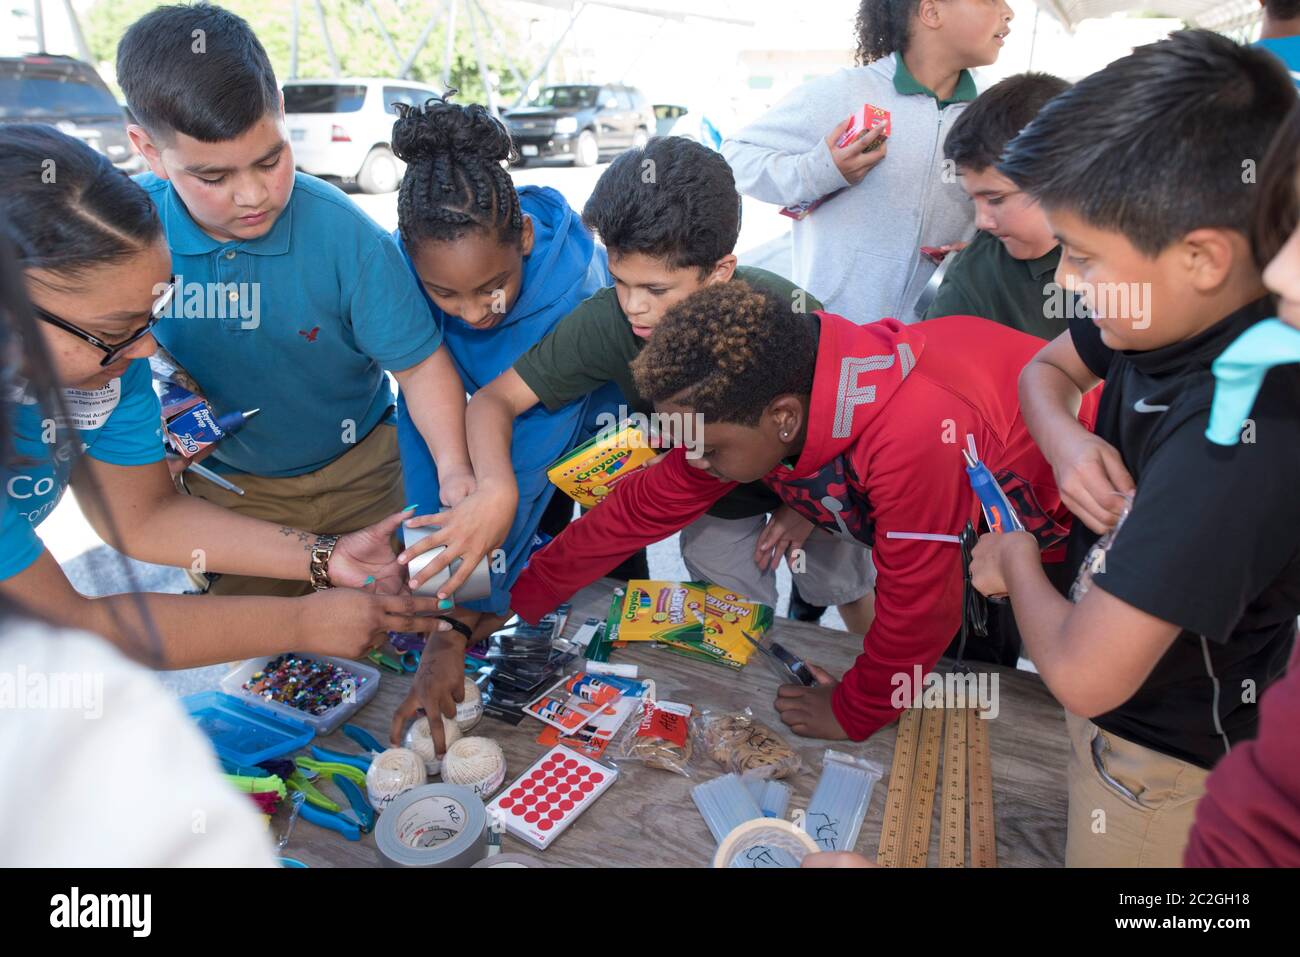 Austin Texas USA, April 20 2016: Students at Cedars International Academy, competing in the Earth Day Cardboard Challenge program at Cedars International Academy, design and build a science display out of cardboard and other simple recycled products. The event was held on Earth Day. ©Bob Daemmrich Stock Photo